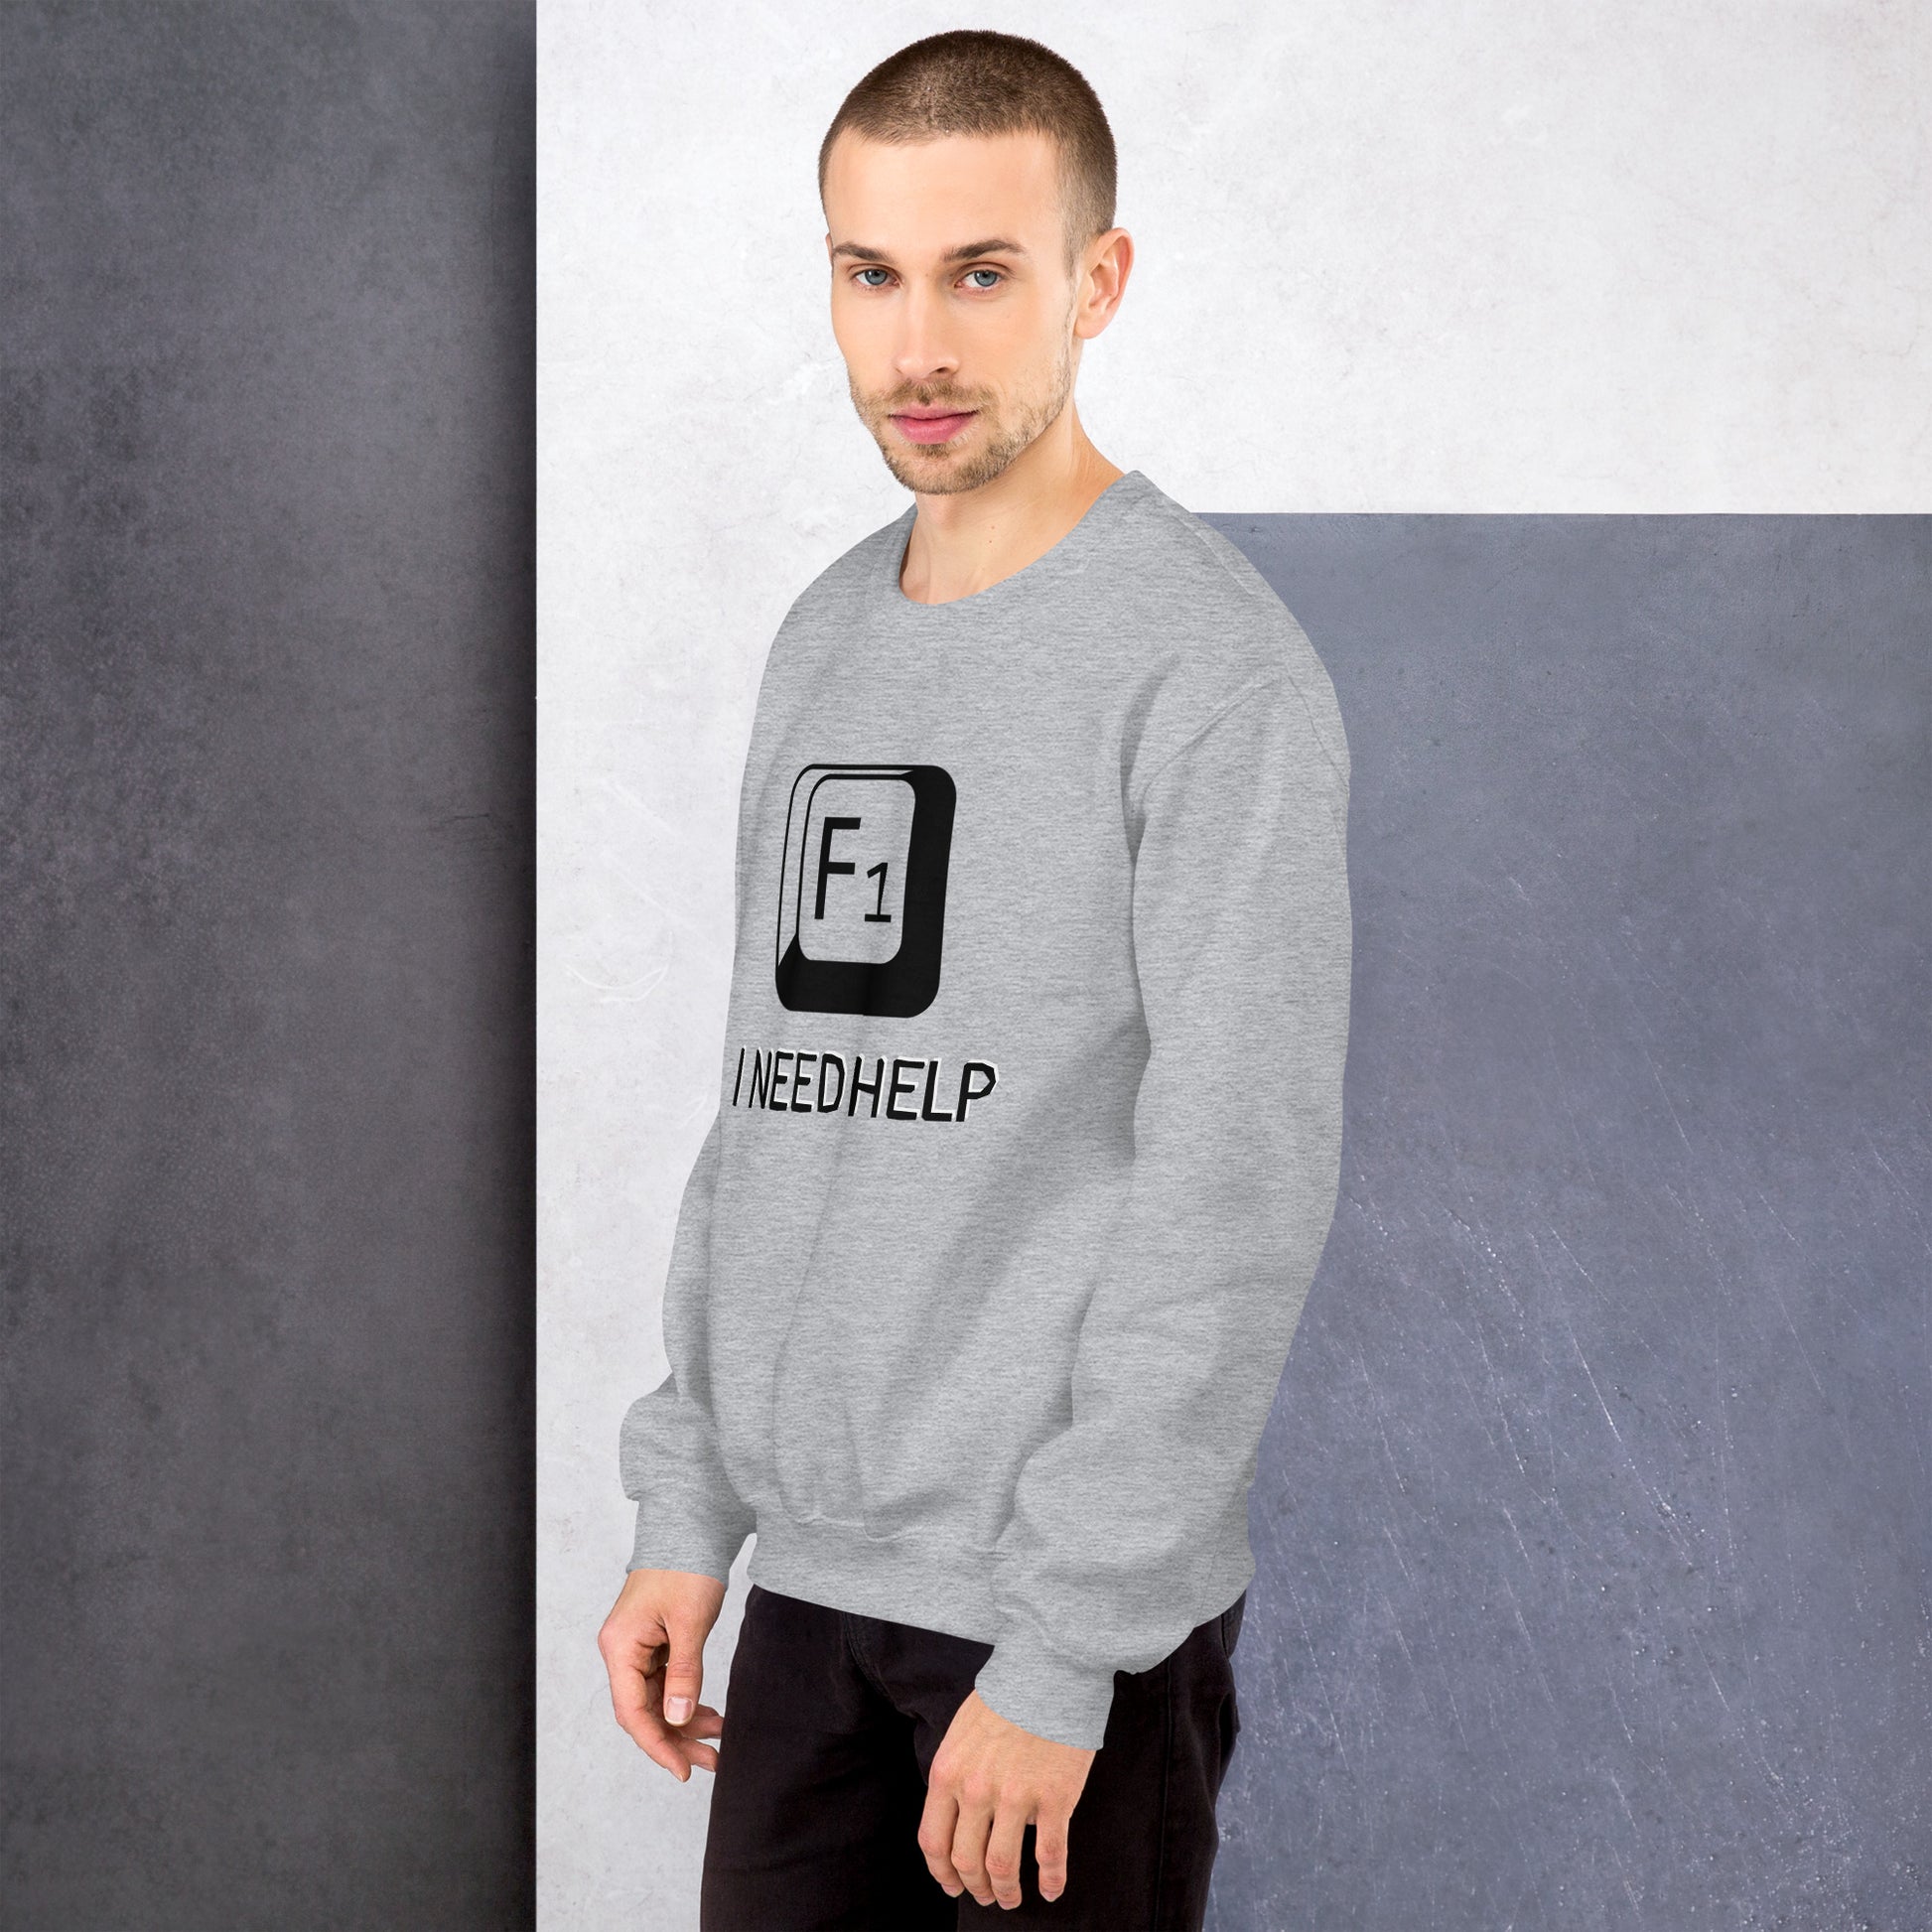 Men with sport grey sweatshirt and a picture of F1 key with text "I need help"